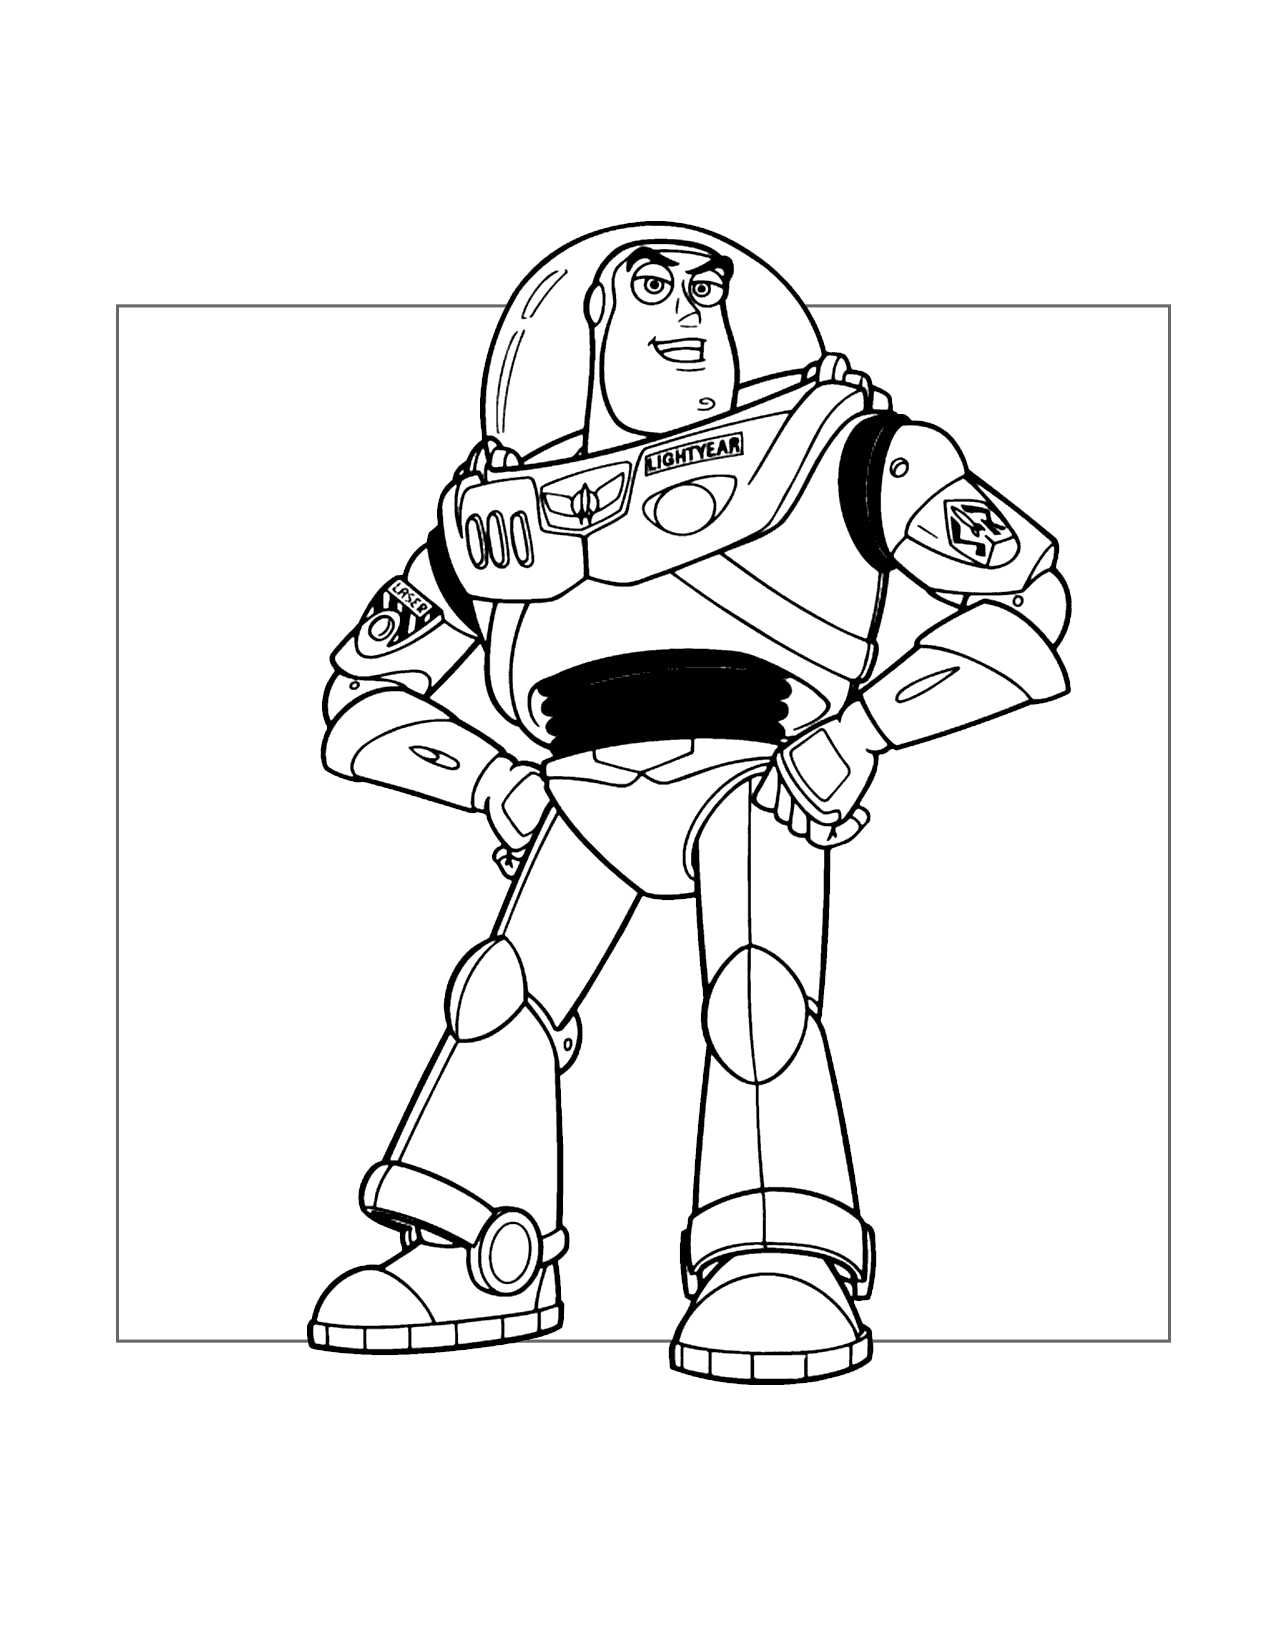 Confident Buzz Lightyear Coloring Page